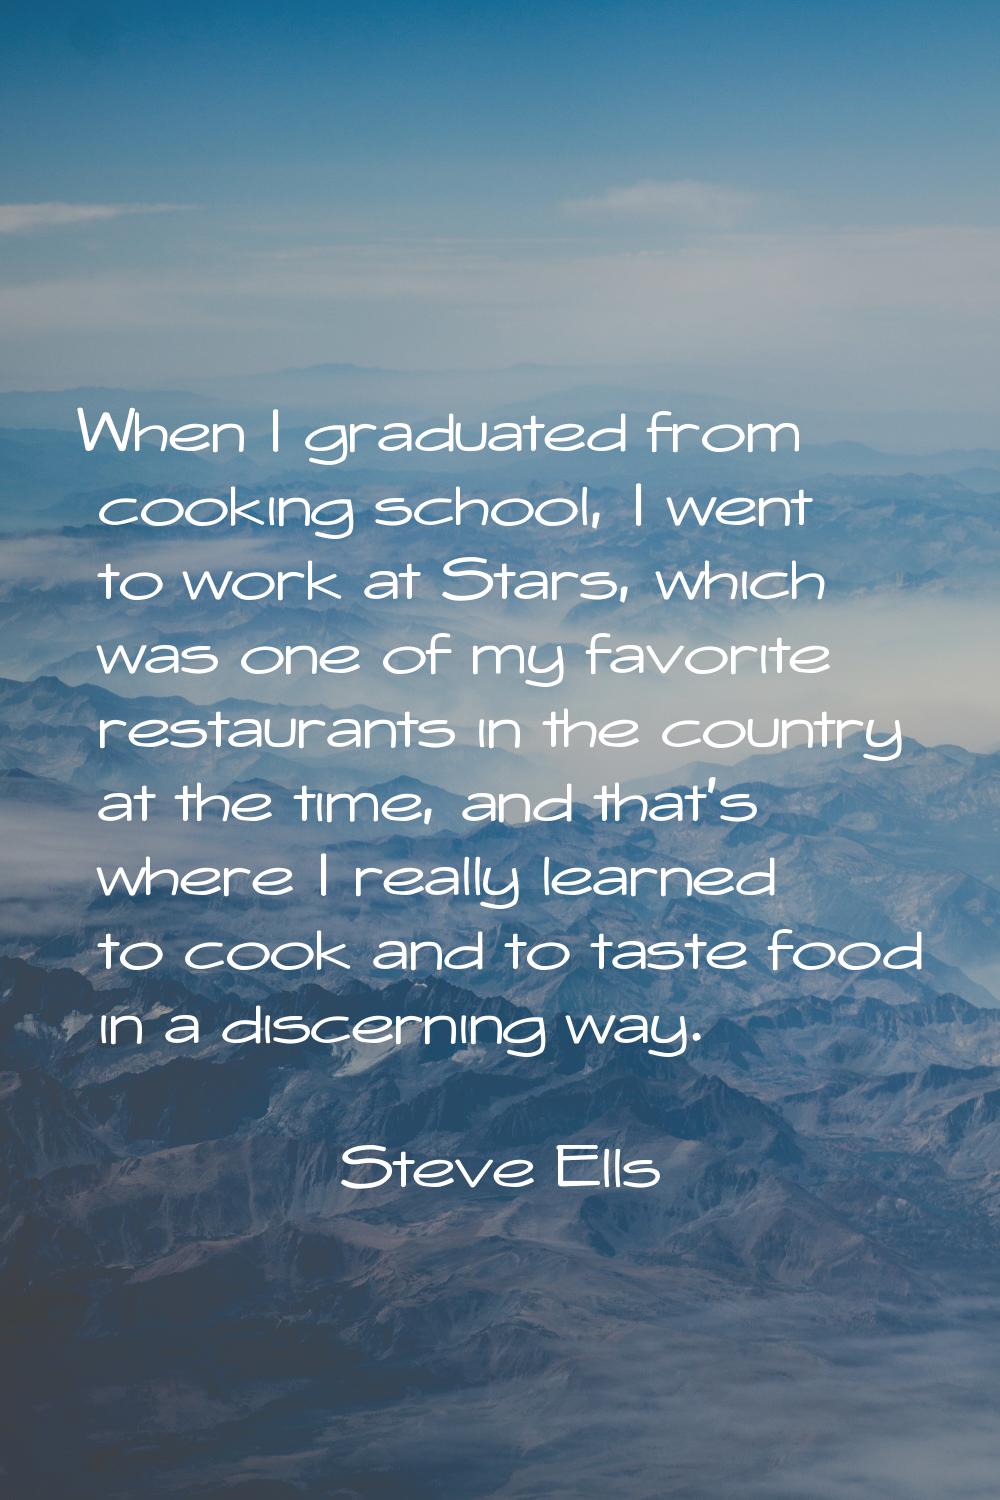 When I graduated from cooking school, I went to work at Stars, which was one of my favorite restaur